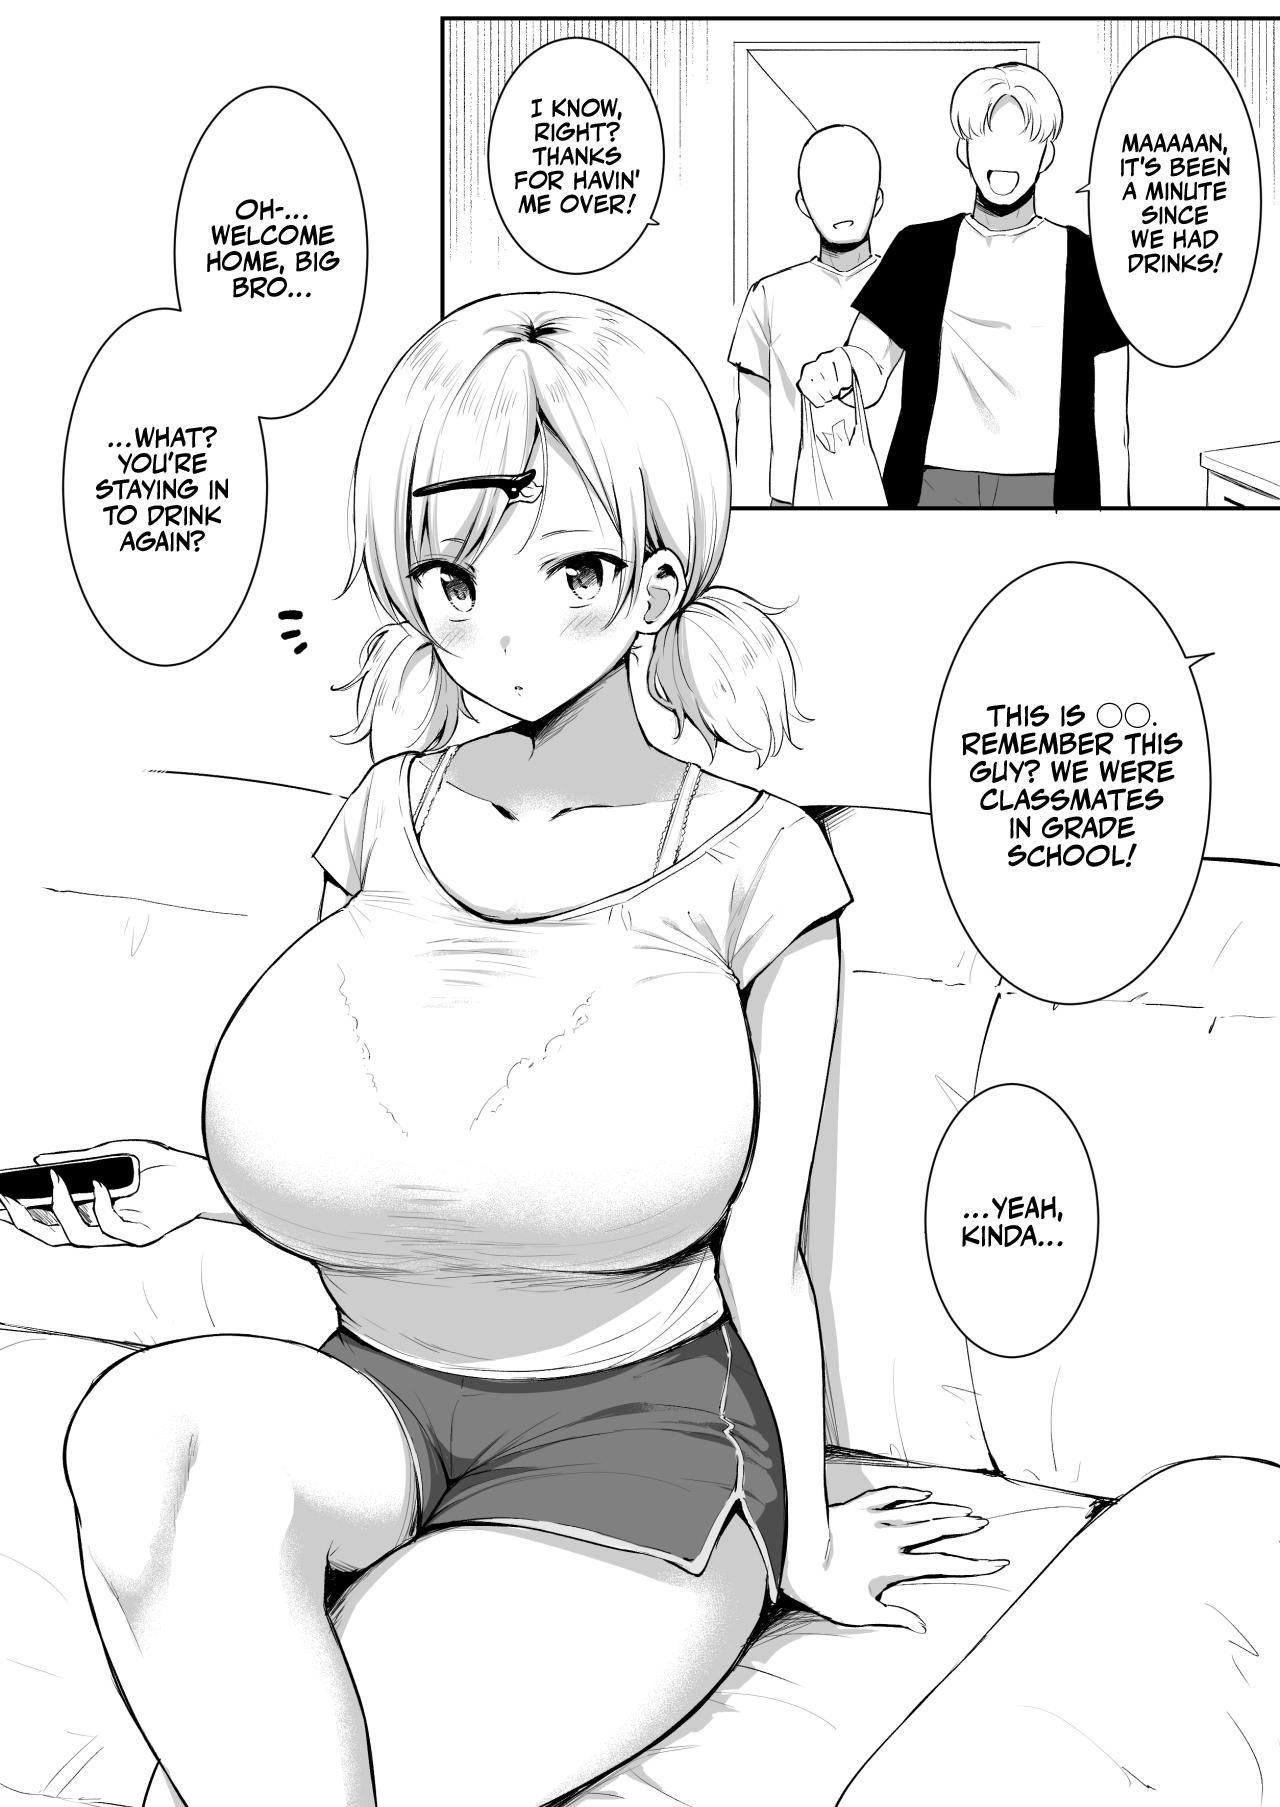 Finger Shinyuu no Imouto | My Best Friend's Little Sister - Original Hot Wife - Page 1